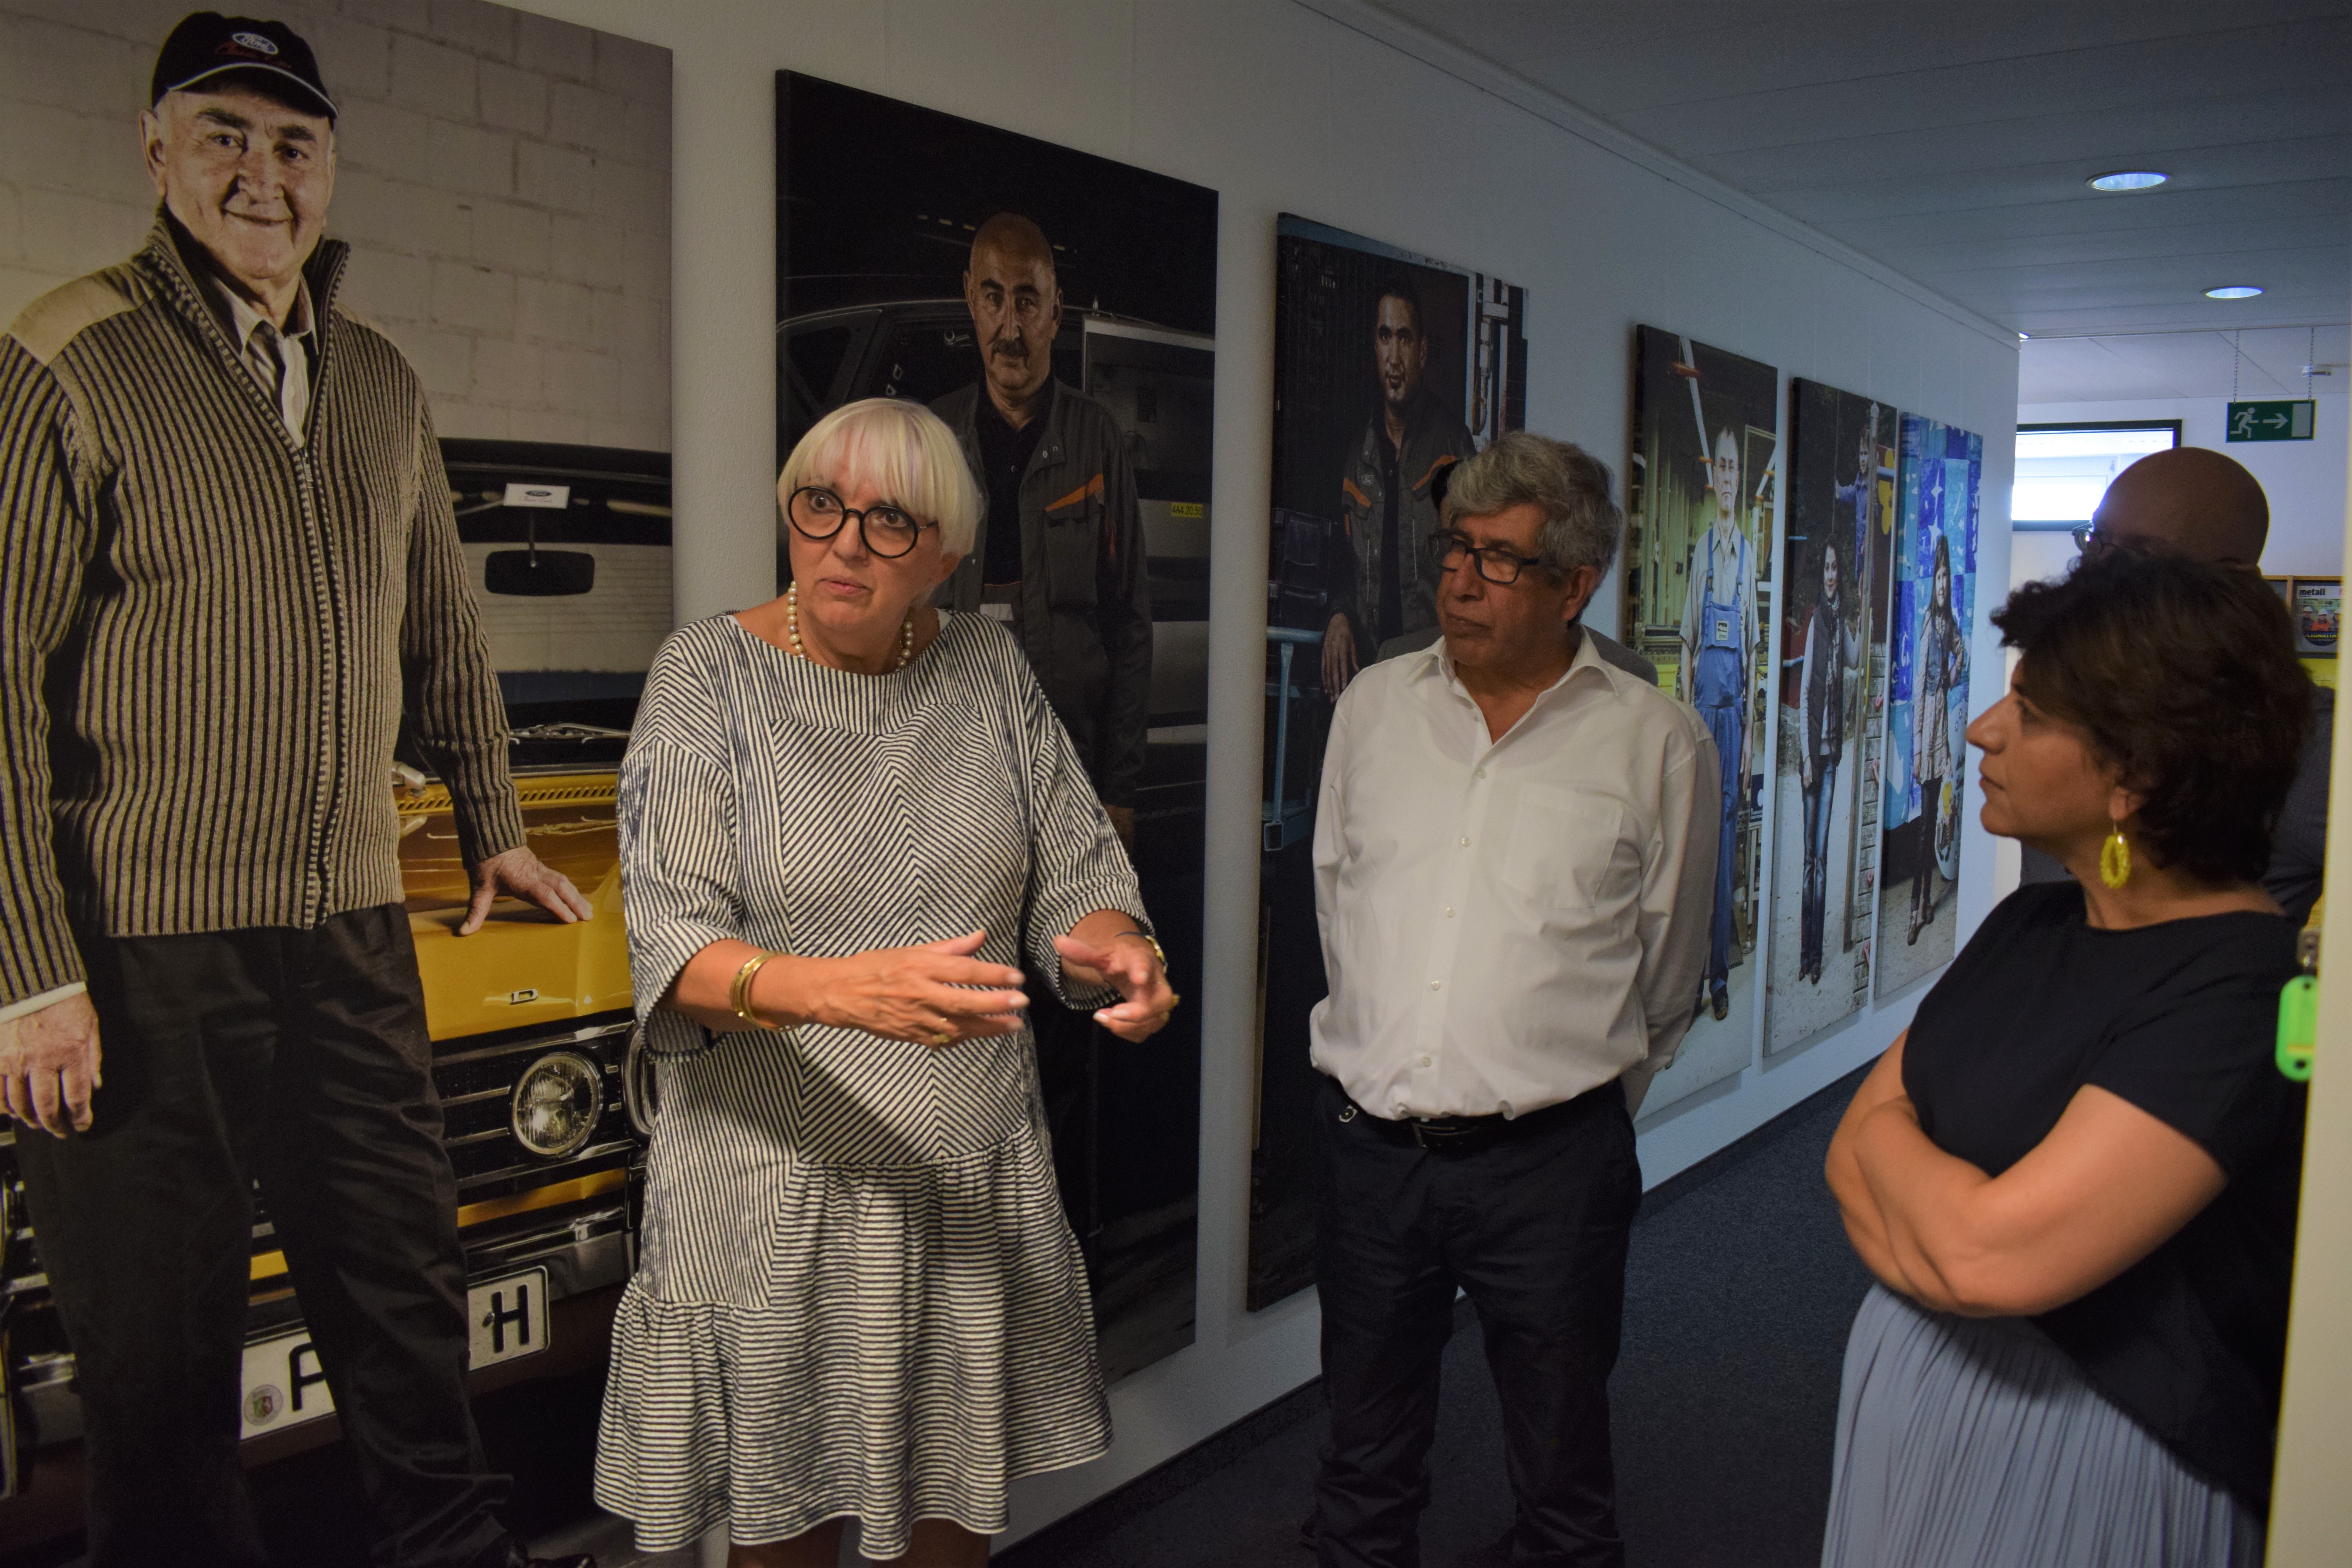 Minister of State for Culture Claudia Roth together with DOMiD board member Ahmet Sezer and Berîvan Aymaz. In the background you can see the photo exhibition "3 Generations" by Guenay Ulutuncok.